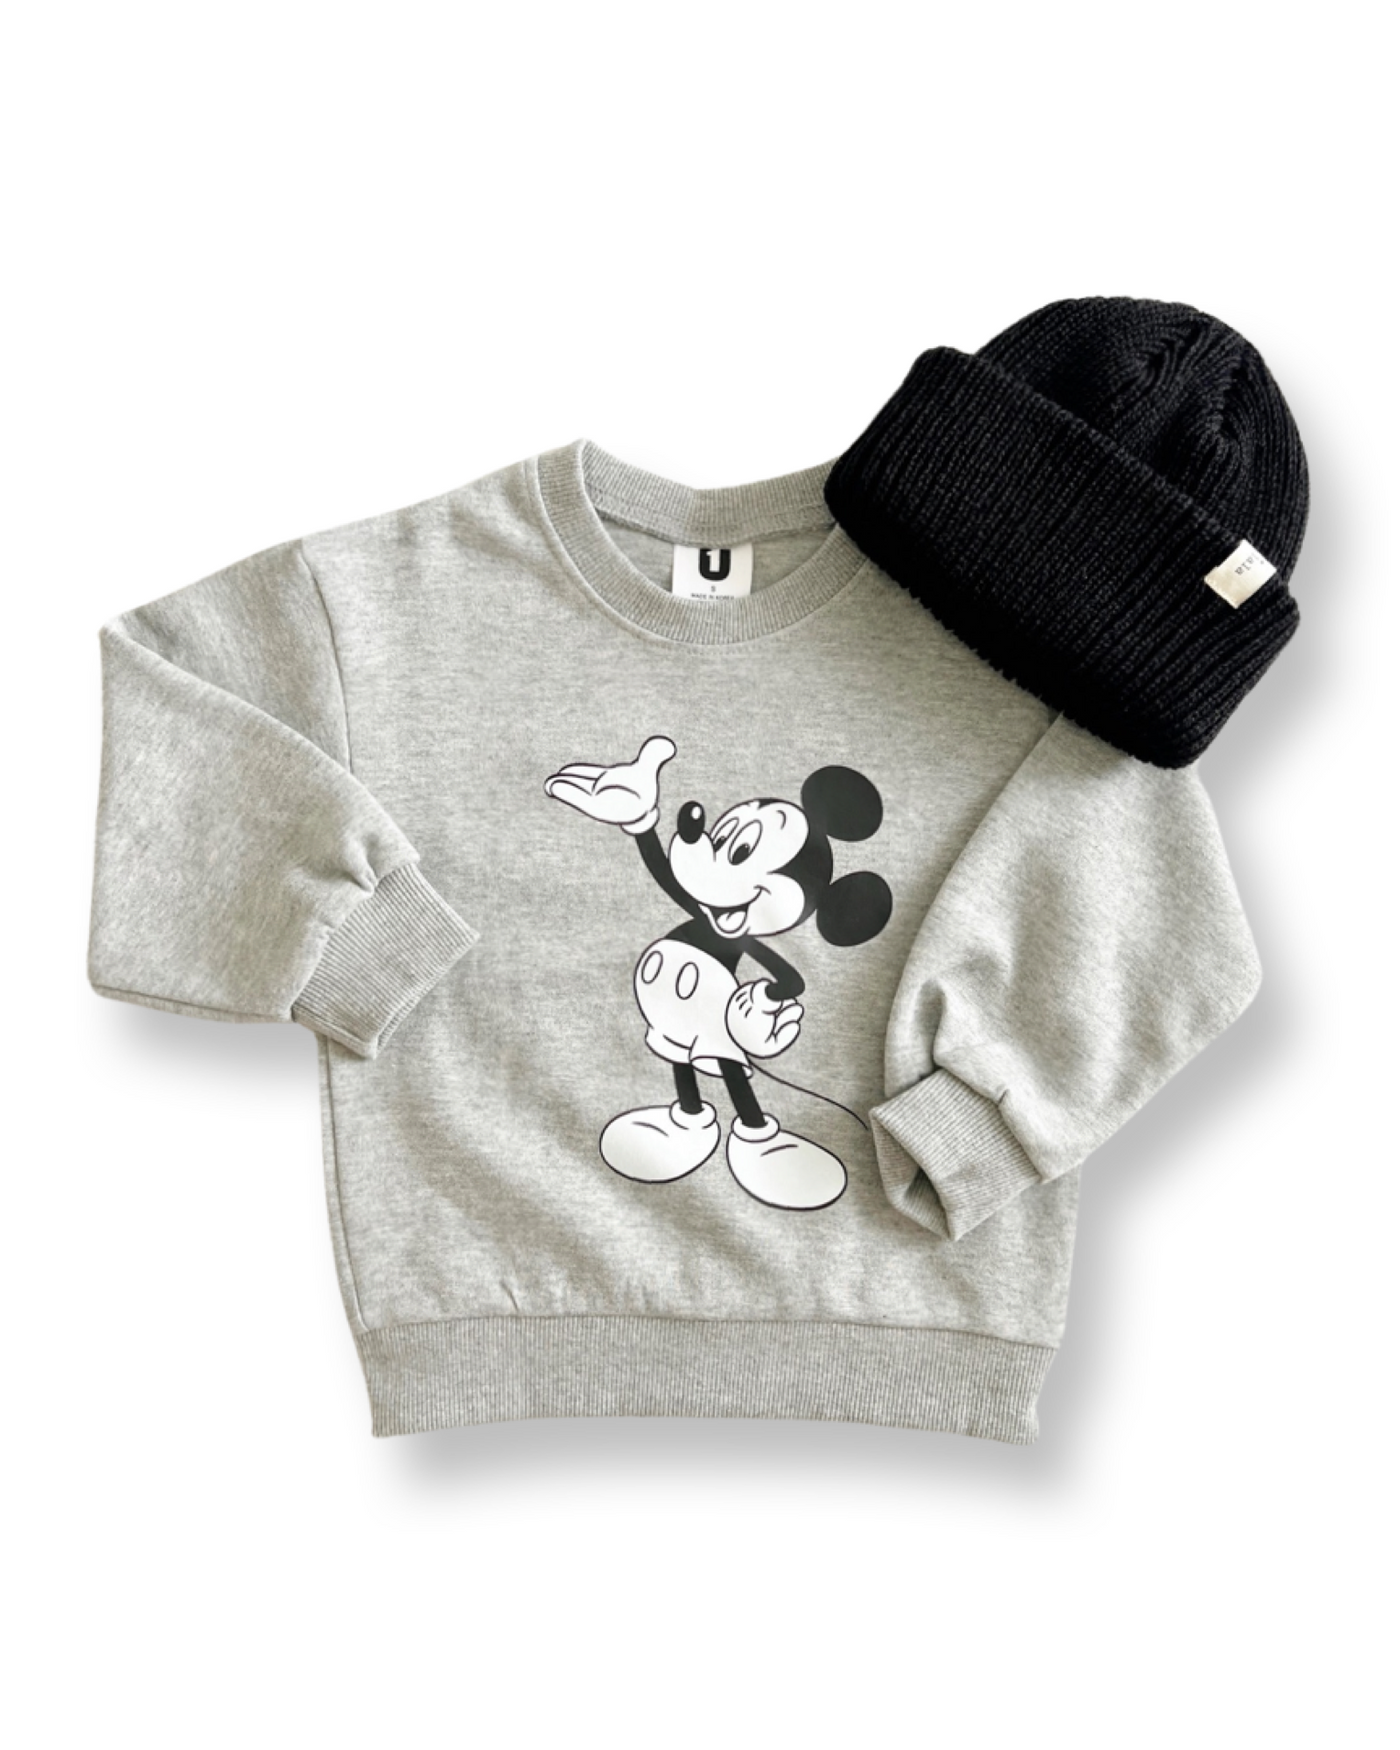 Classic Mickey Mouse 2-Piece Set